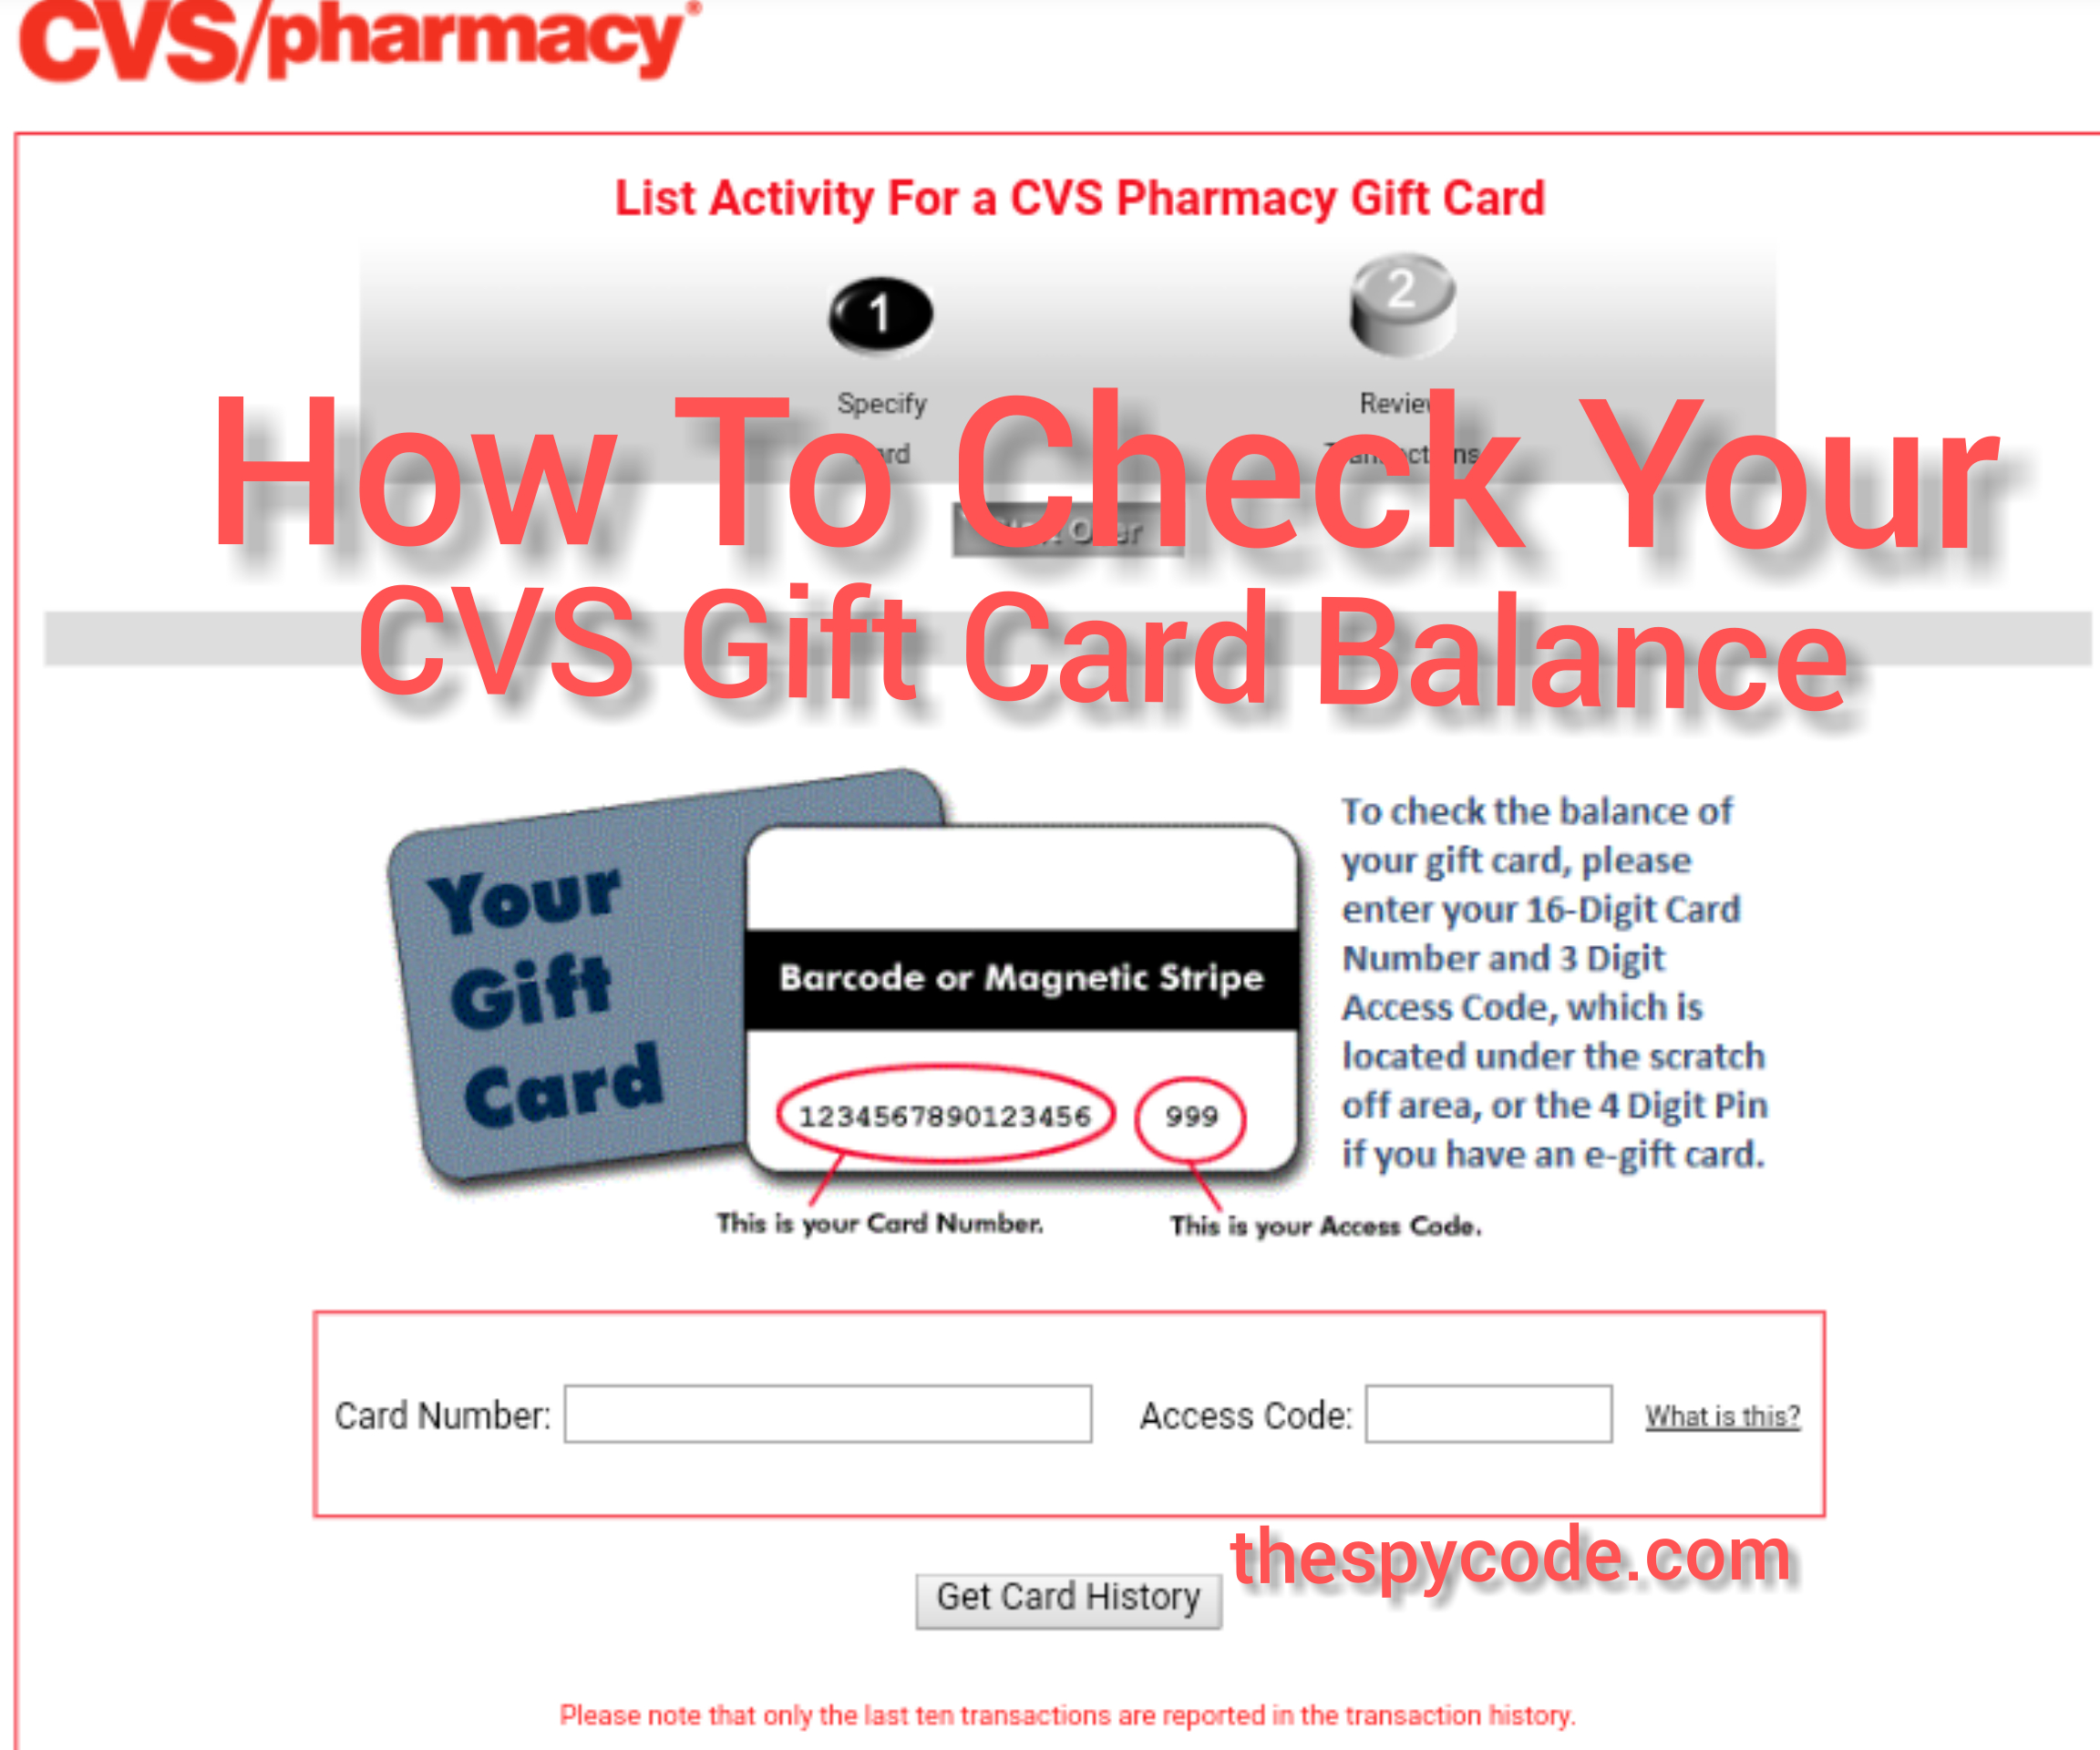 CVS Gift Card Balance Inquiry - How To Check The Balance On A CVS Gift Card